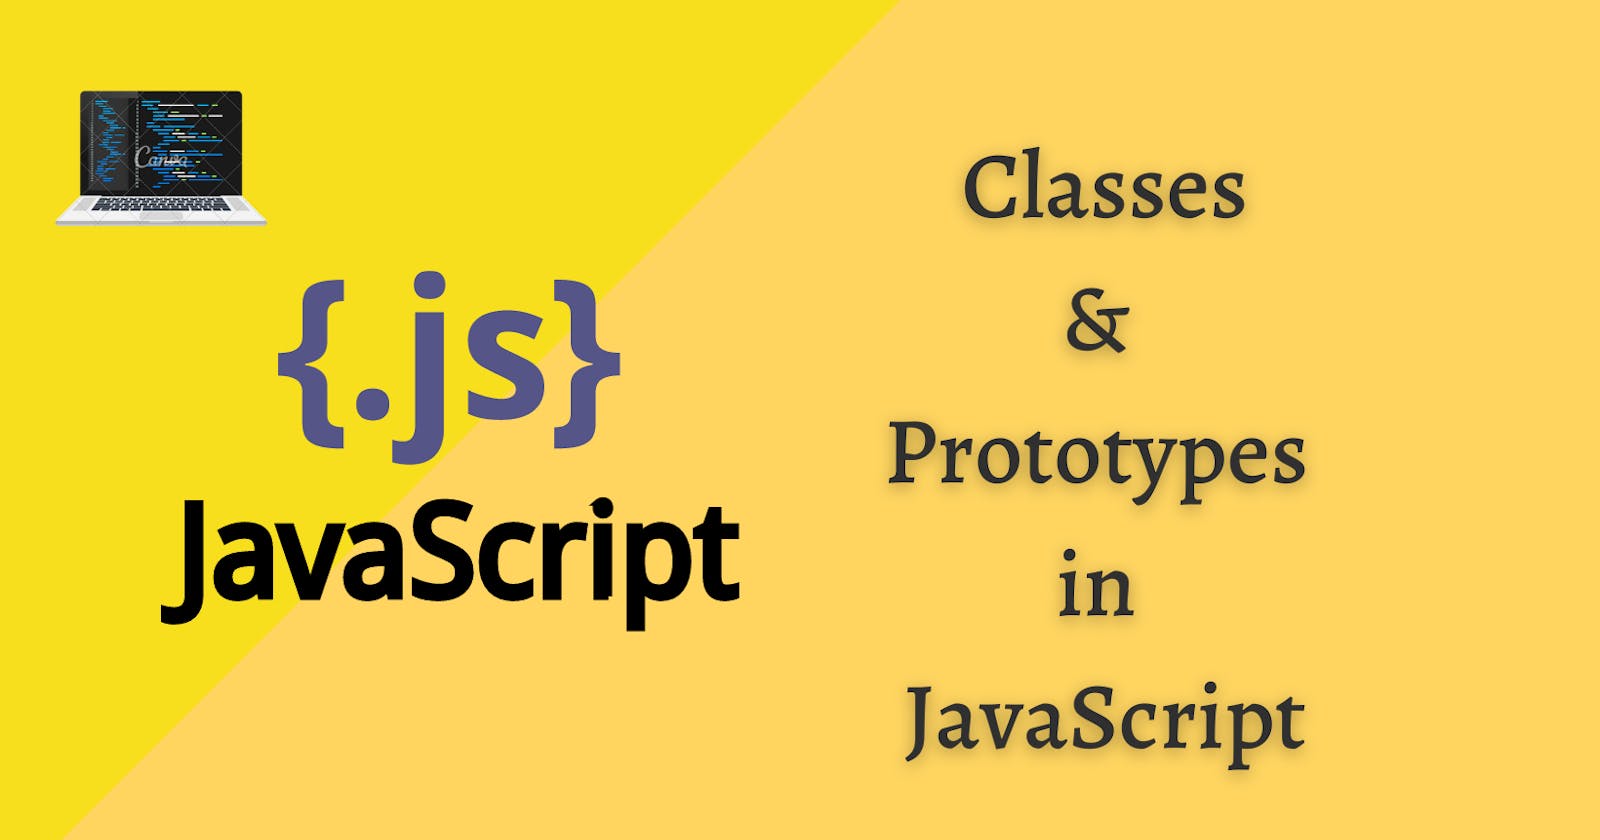 Classes and Prototypes in JavaScript